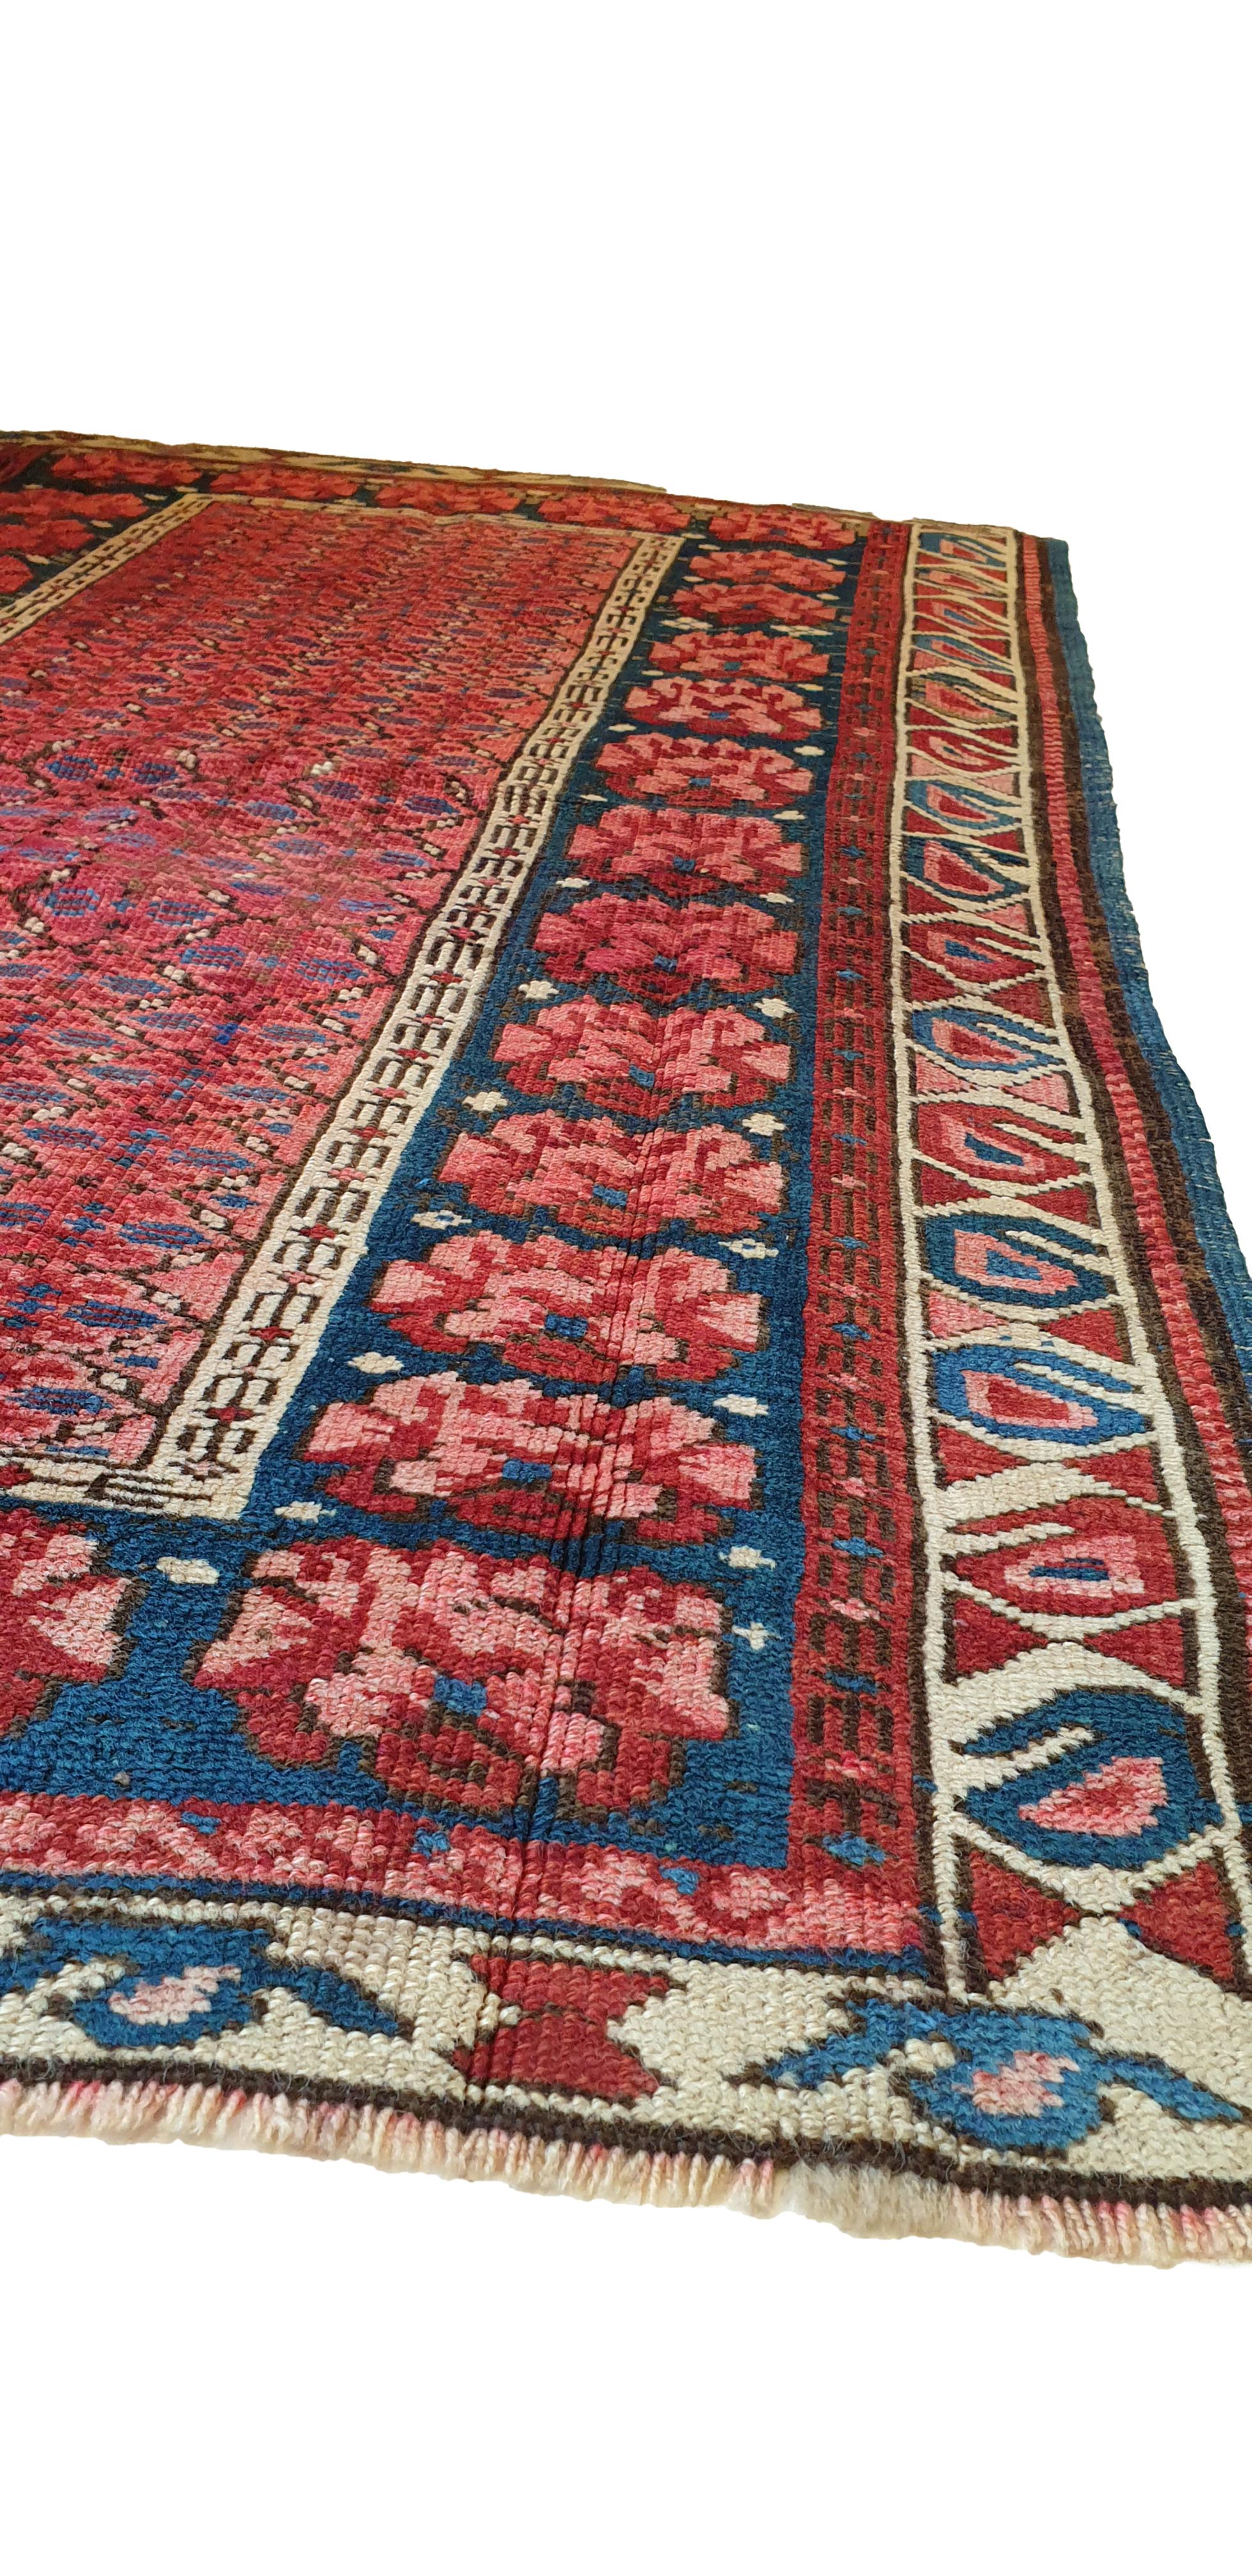 Tribal  Important Seikhour Rug from Russia , 19th Century - N° 640 For Sale